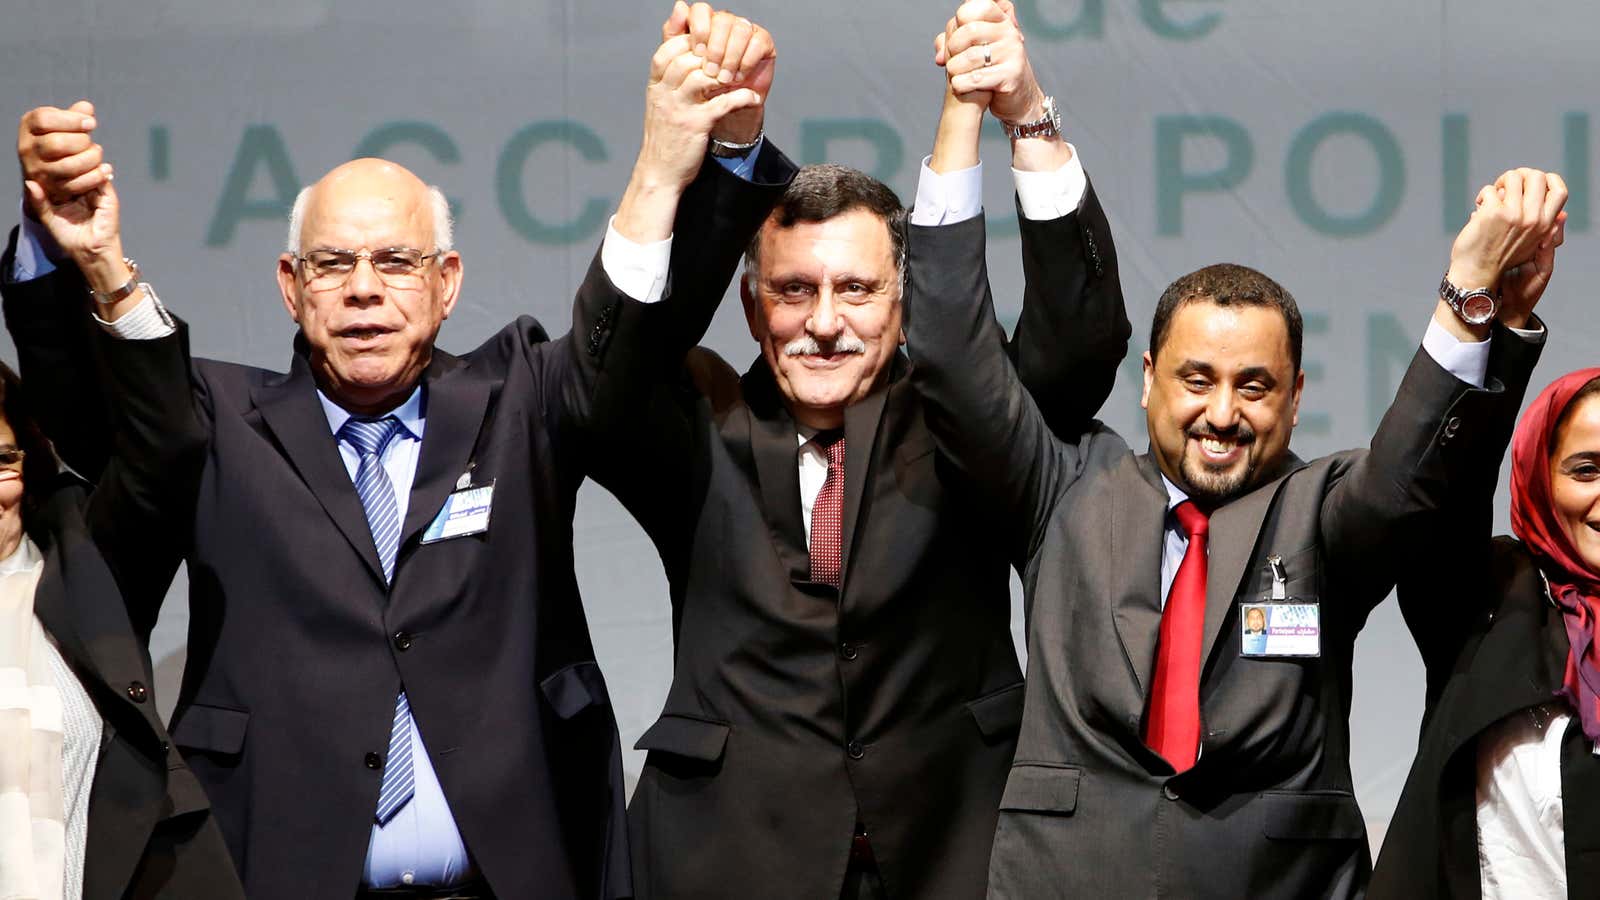 From left to right, Mohammed Chouaib, head of delegation from the UN-recognized government in the eastern city of Tobruk, Libya; Fayez Sarraj, Libyan Prime minister; and Dr. Saleh Almkhozom, second deputy chairman of the Libyan General National Congress,